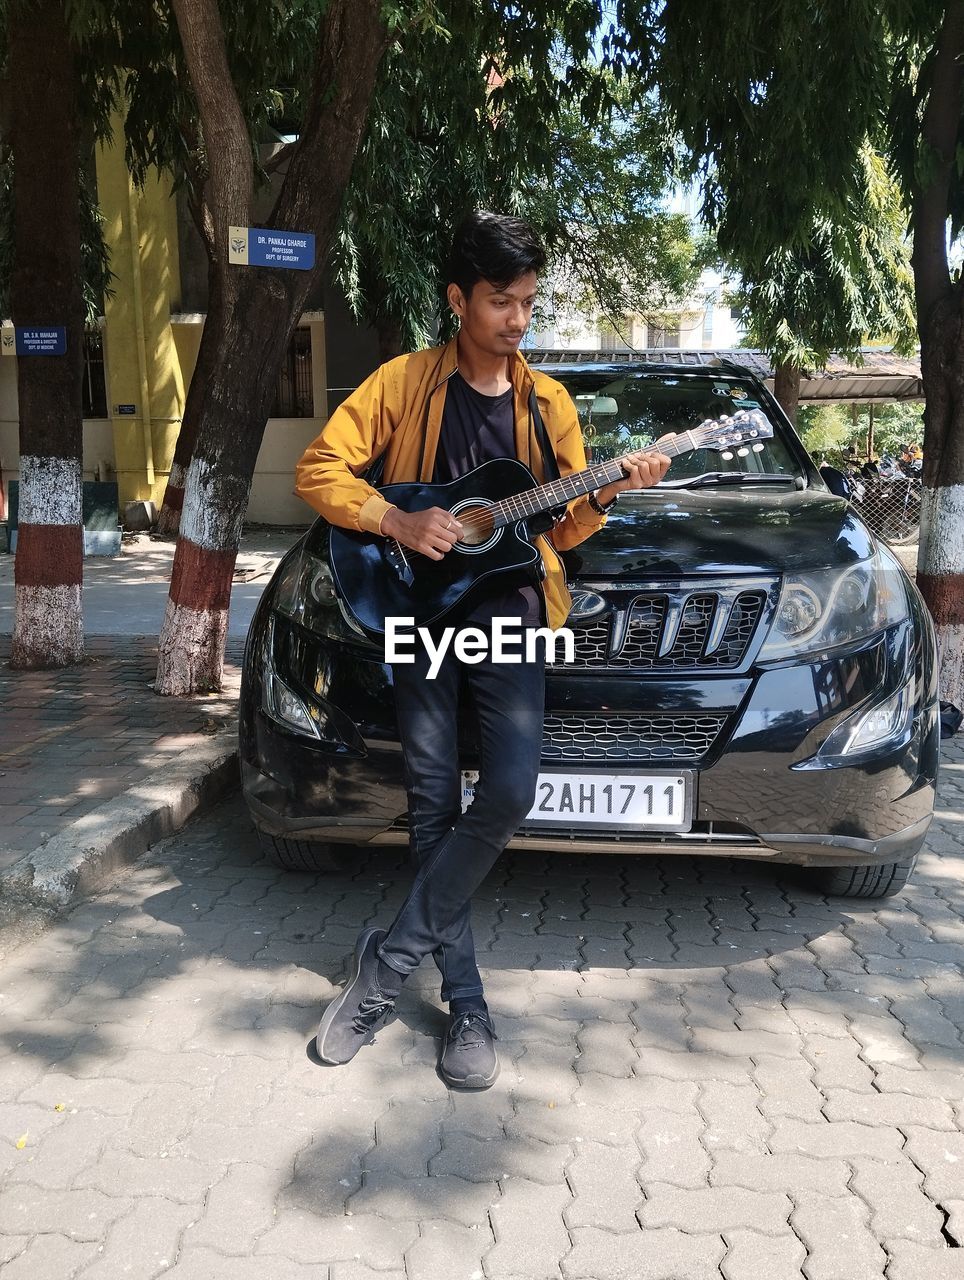 car, mode of transportation, transportation, motor vehicle, full length, one person, vehicle, adult, men, tree, casual clothing, city, musician, musical instrument, day, person, street, land vehicle, music, young adult, outdoors, arts culture and entertainment, guitar, musical equipment